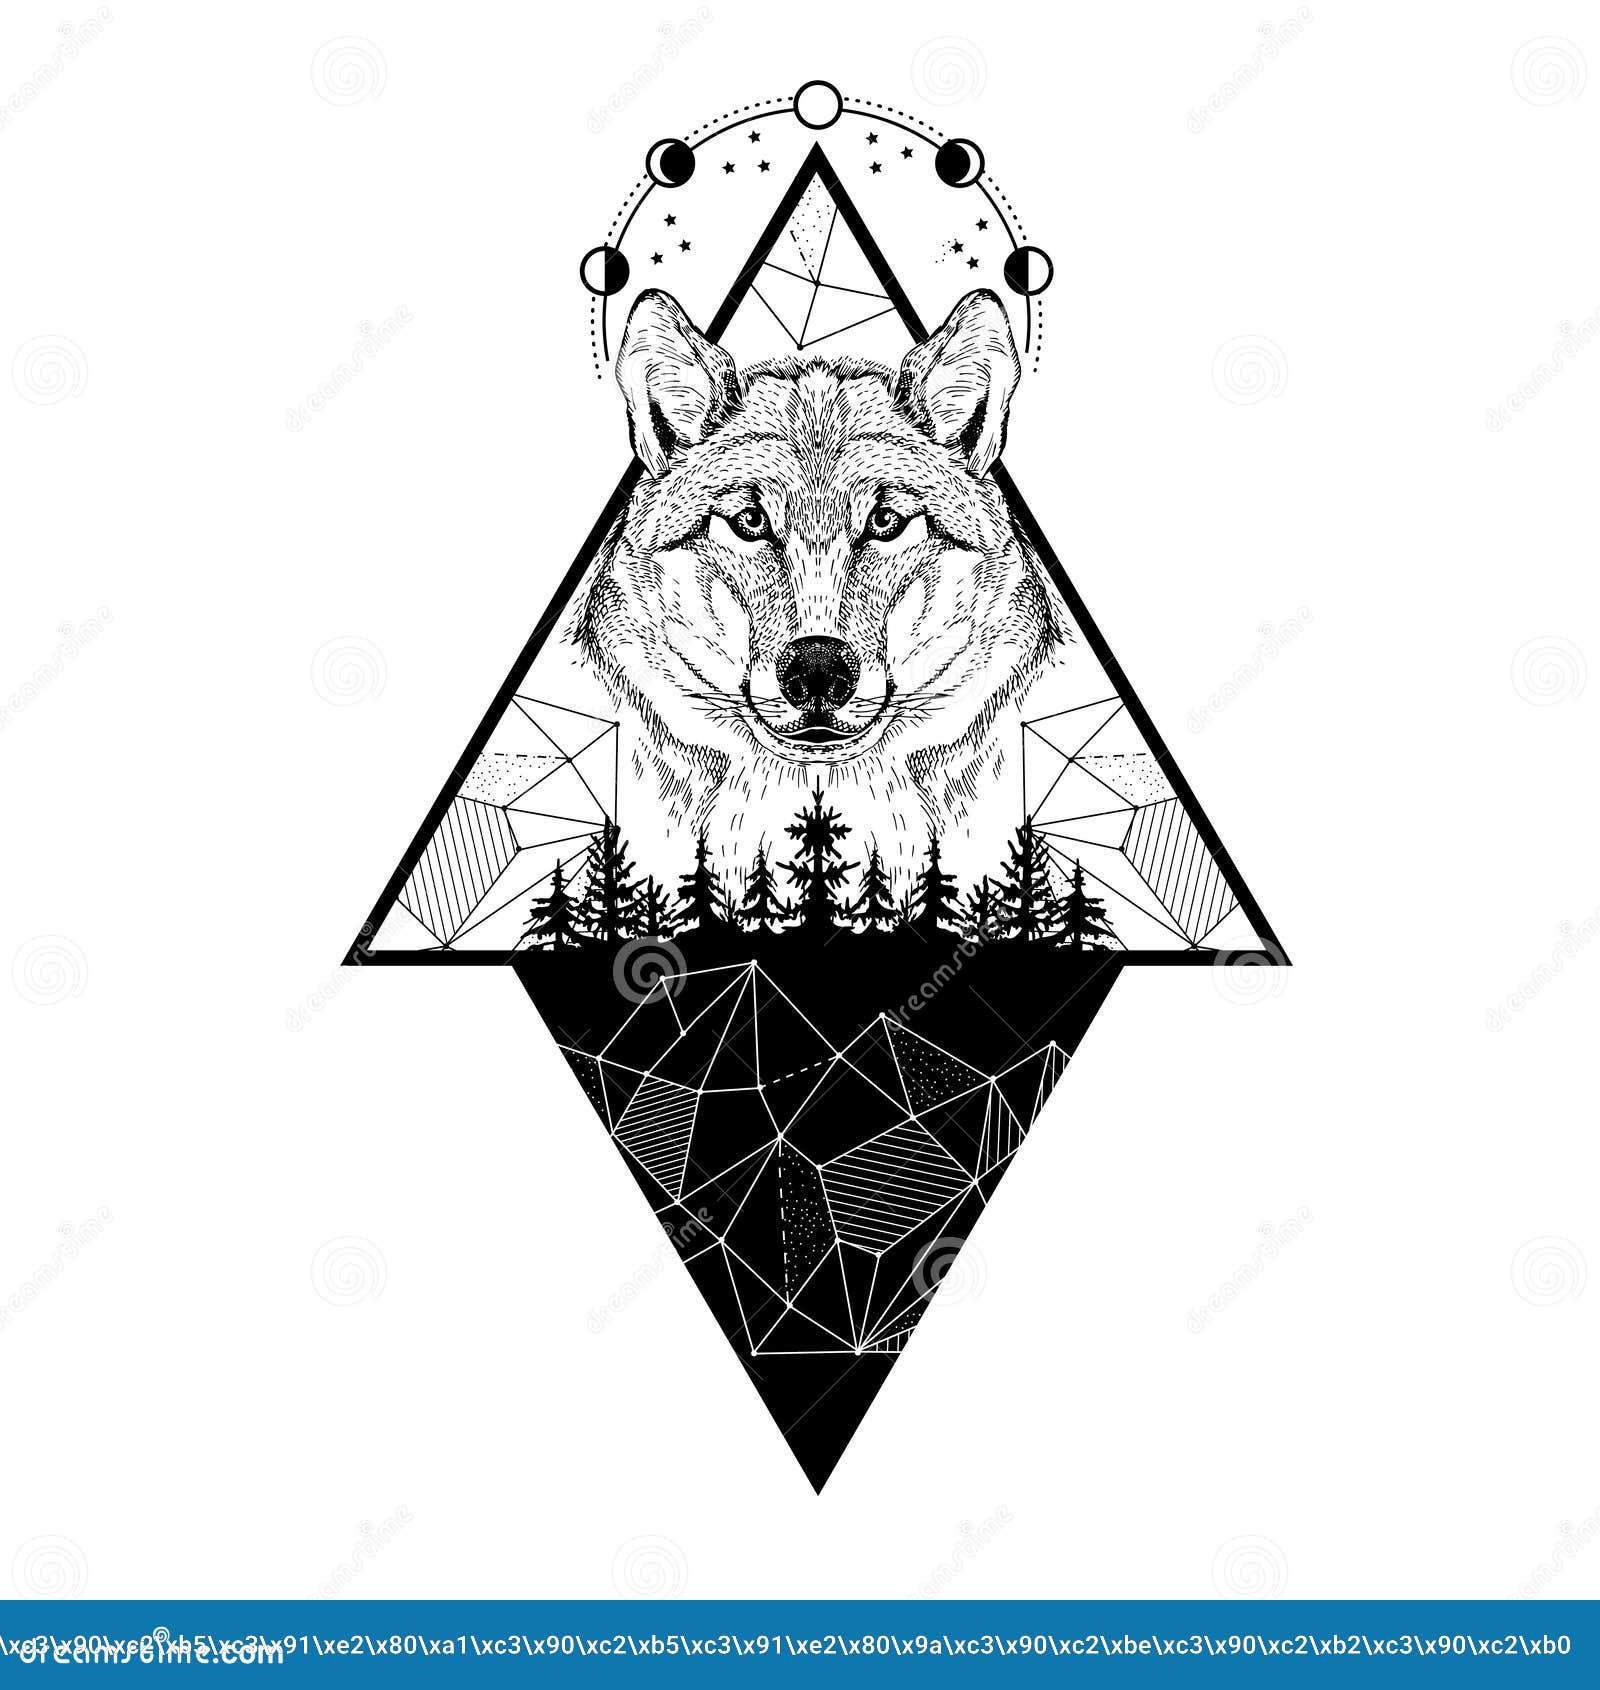 Outline Triangle Art Design Vector Graphic by coxvect · Creative Fabrica